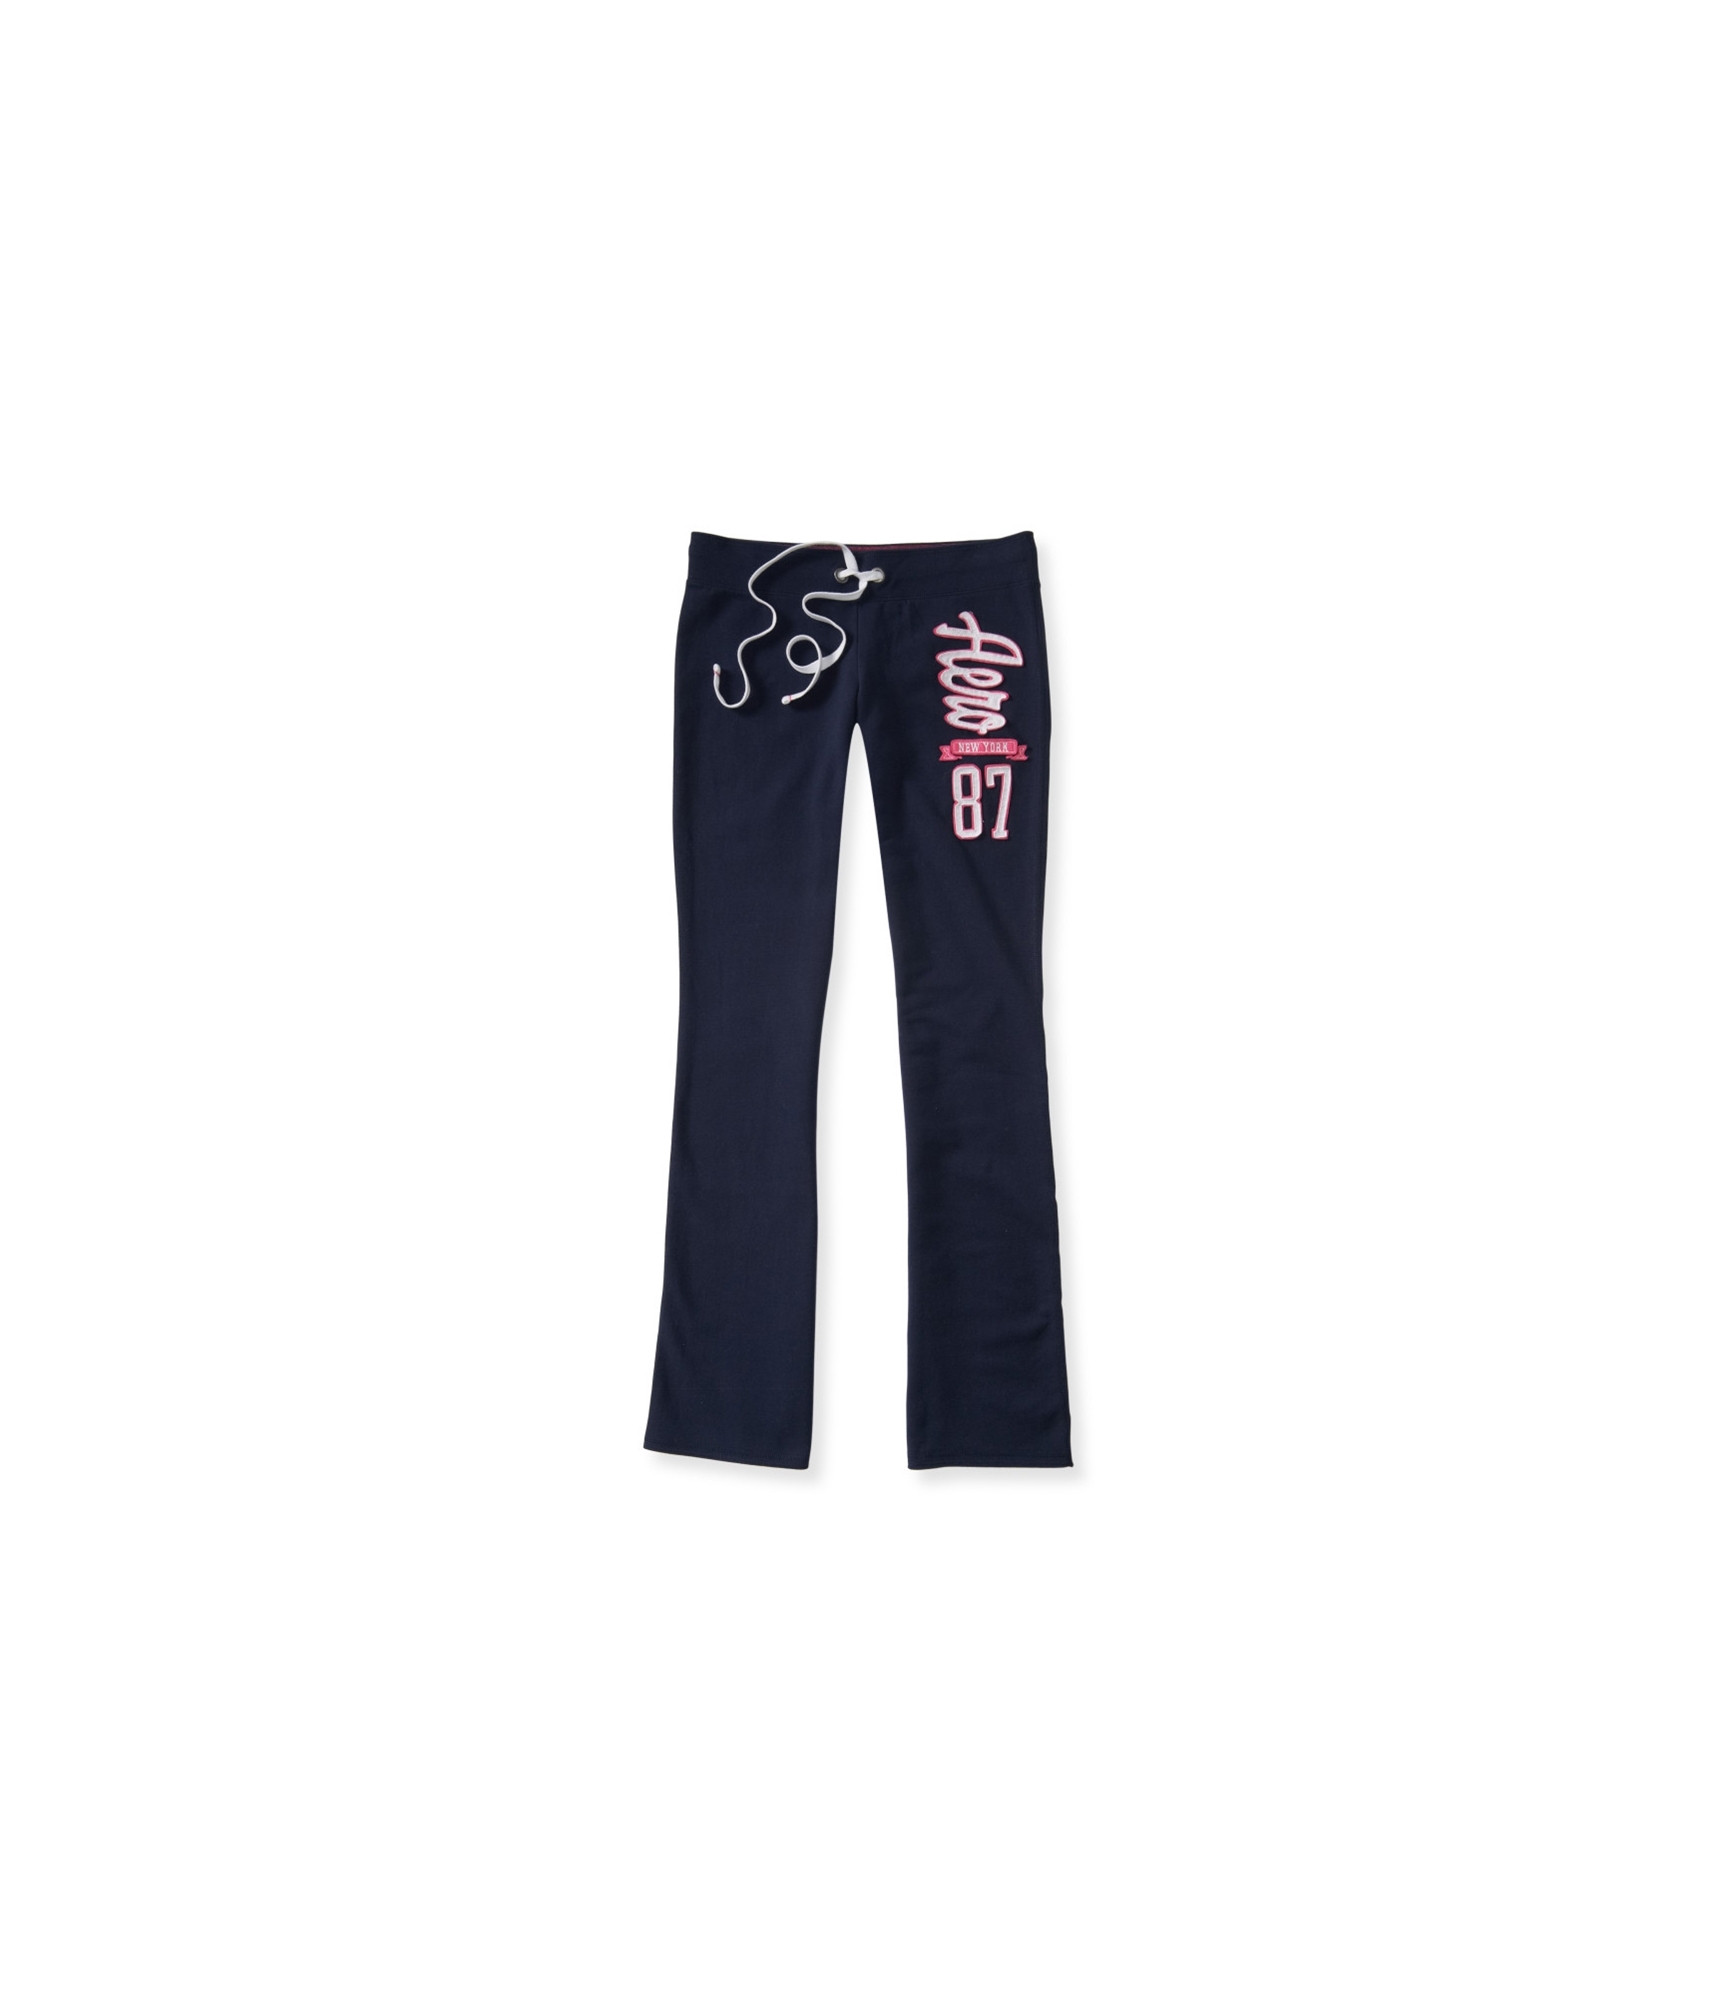 Buy a Aeropostale Womens Fit & Flare Casual Sweatpants, TW1